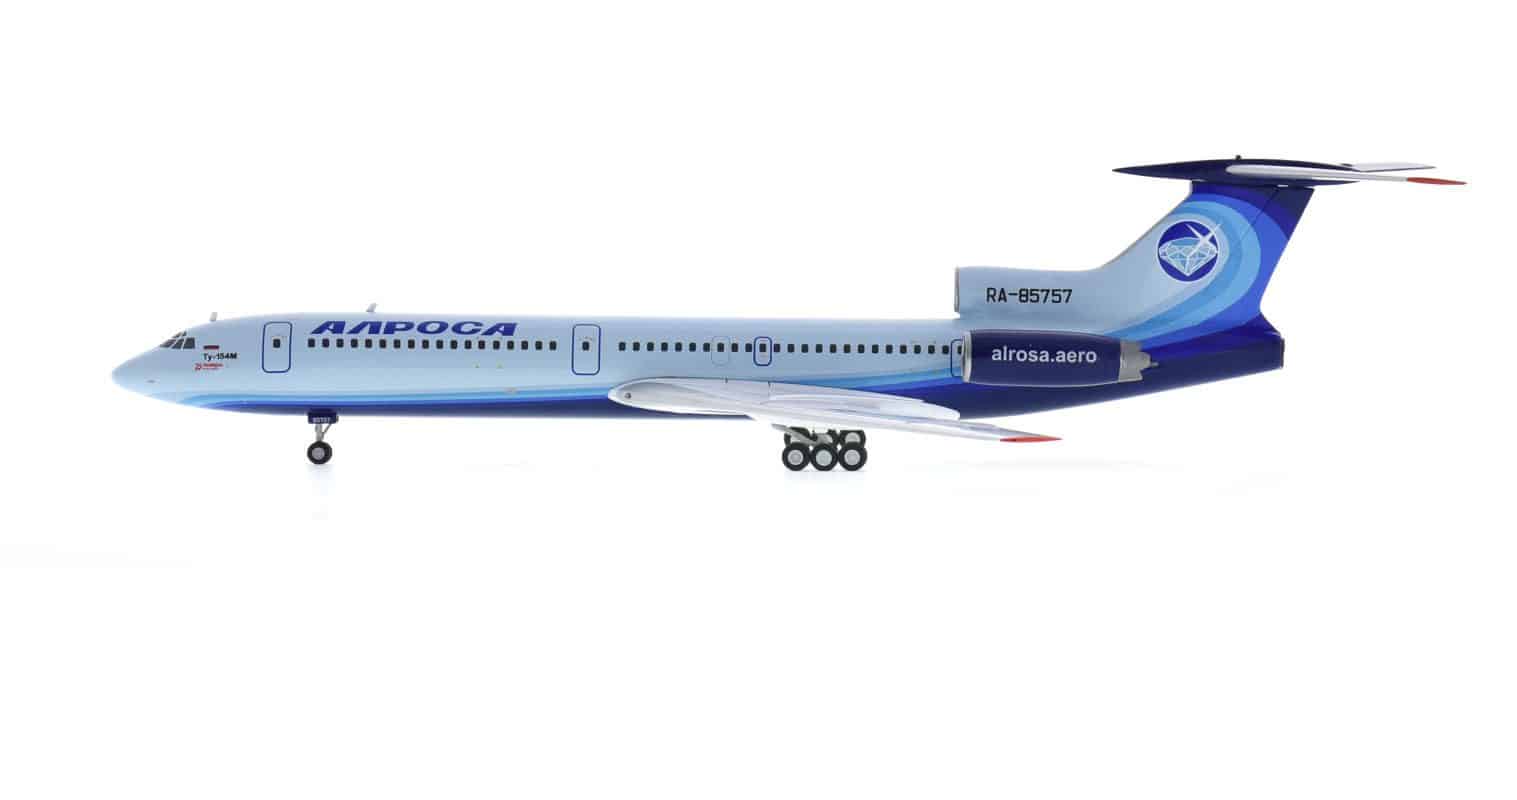 Port side view of Herpa HE571388 - 1/200 scale diecast model of the Tupolev Tu-154M registration RA-85757 in Air Company ALROSA livery, October 2020. This aircraft operated the last commercial flight in Russia of the Tu-154.